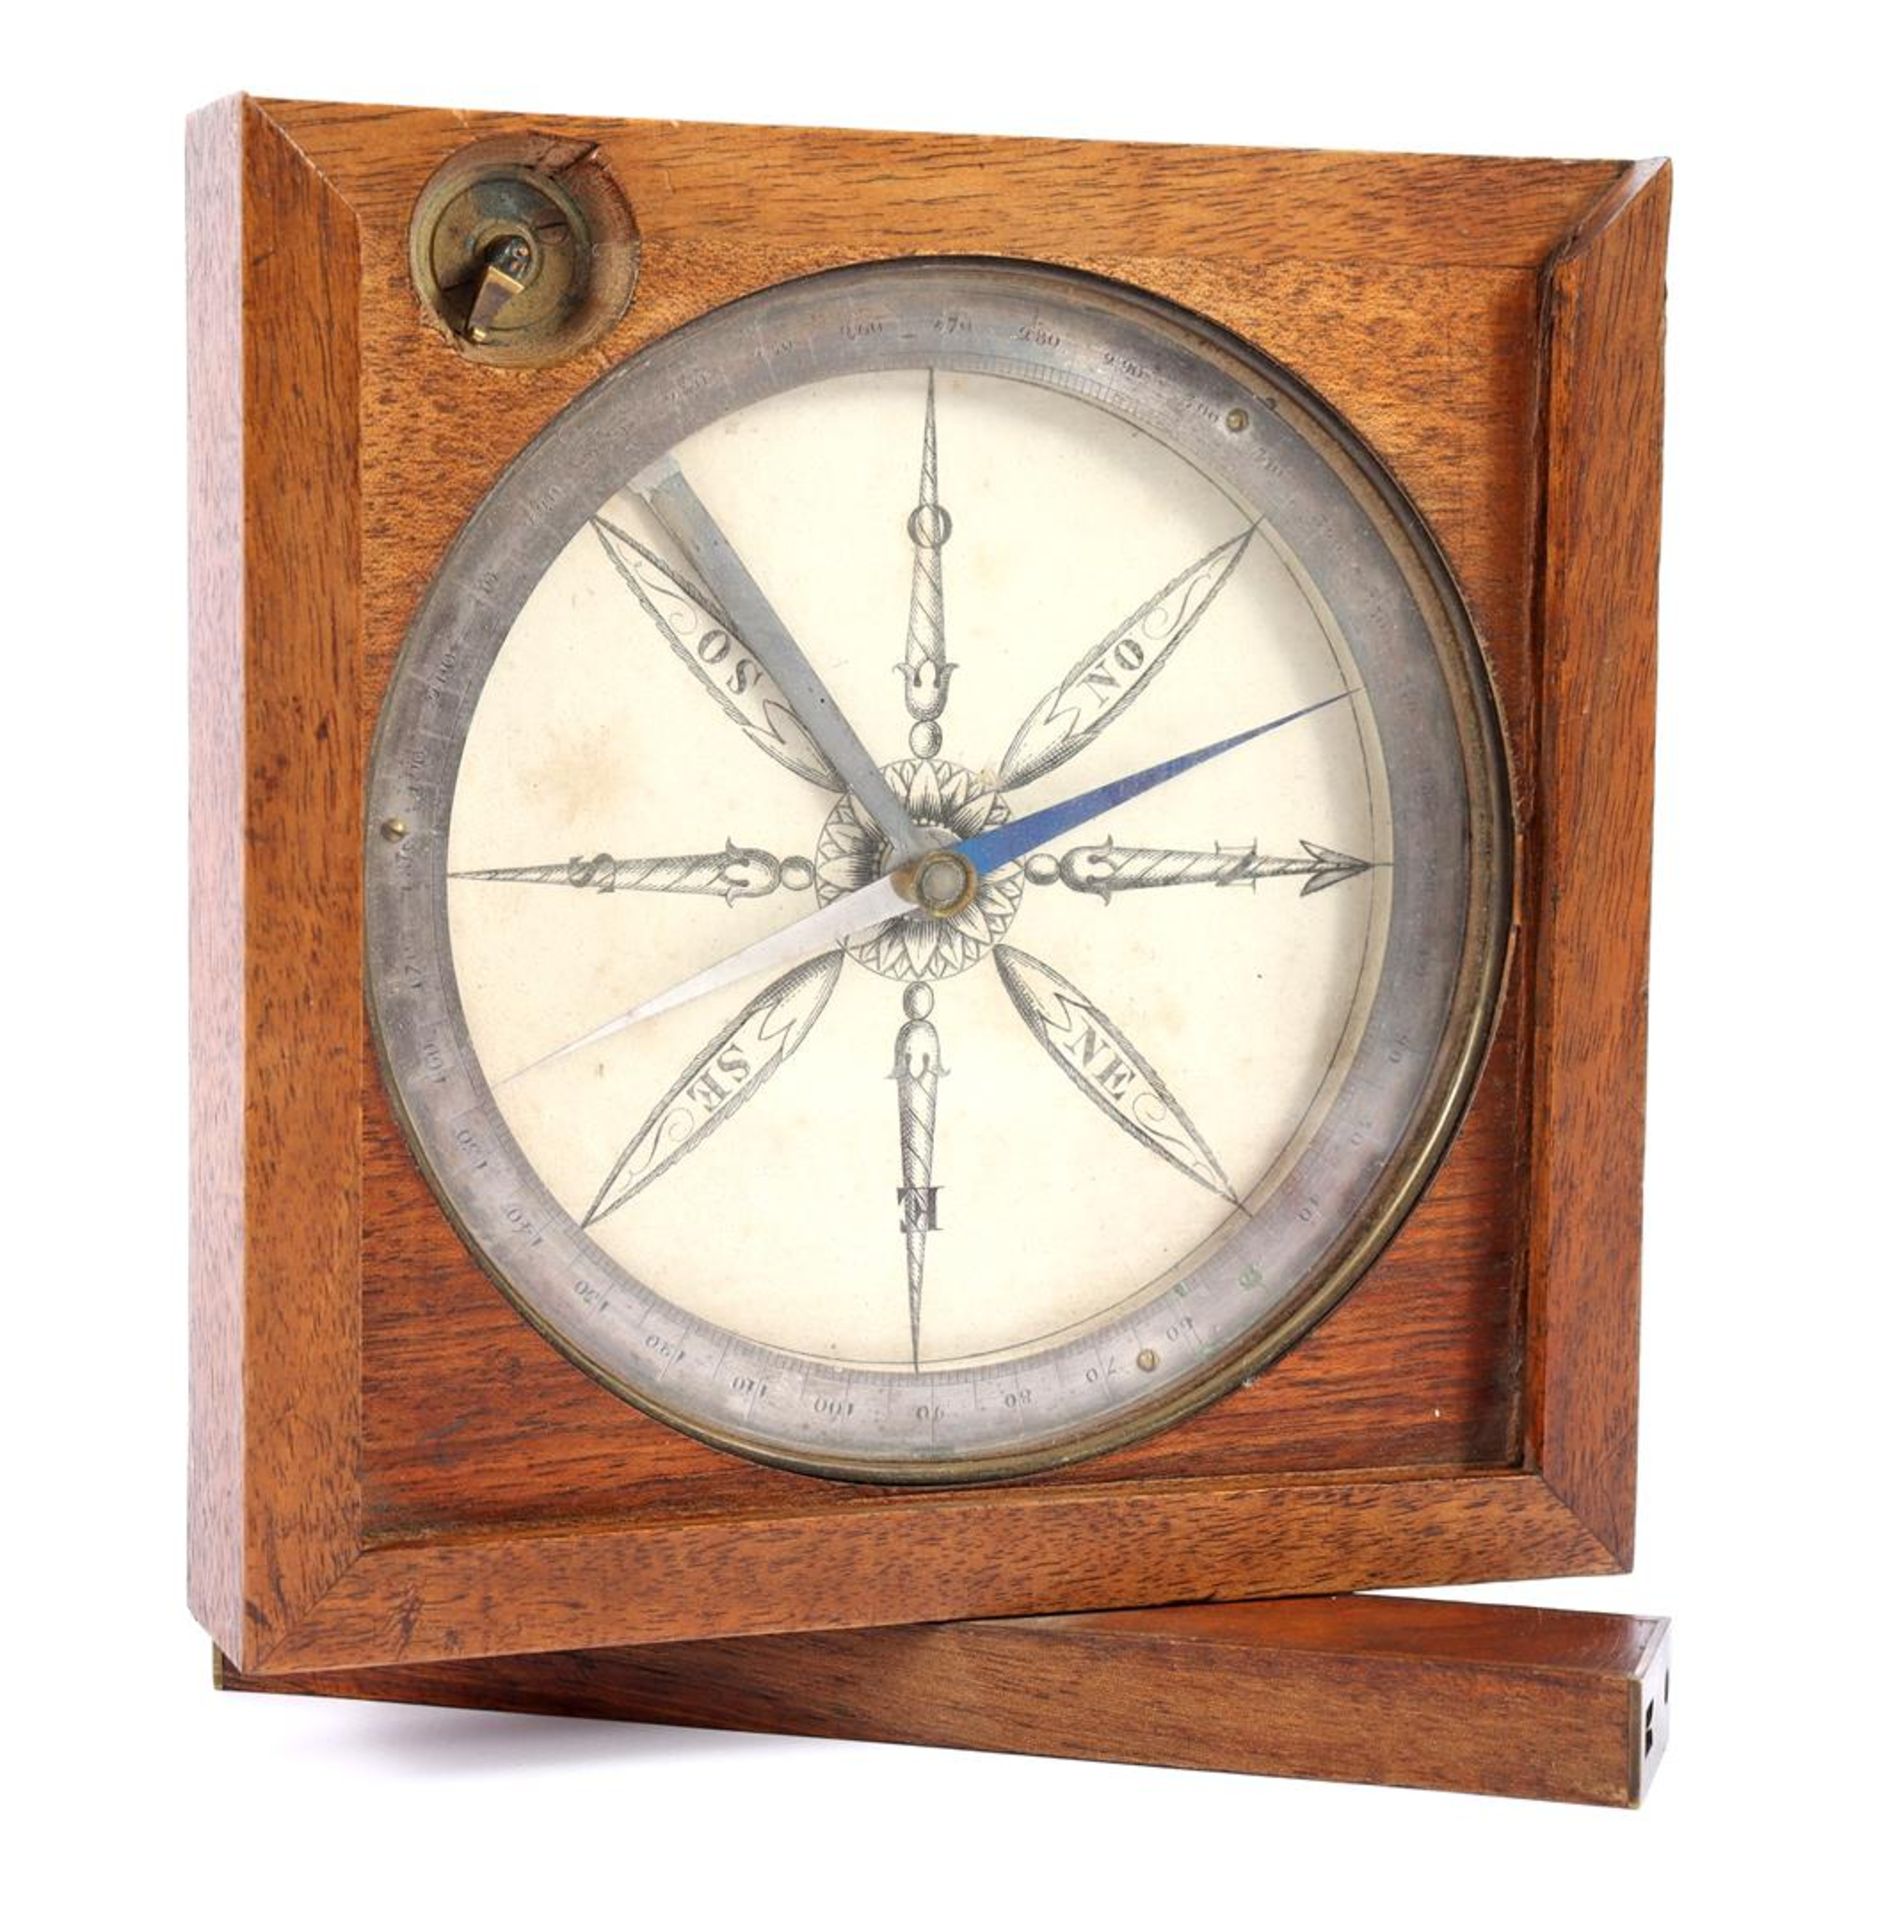 Early 19th century French surveying compass